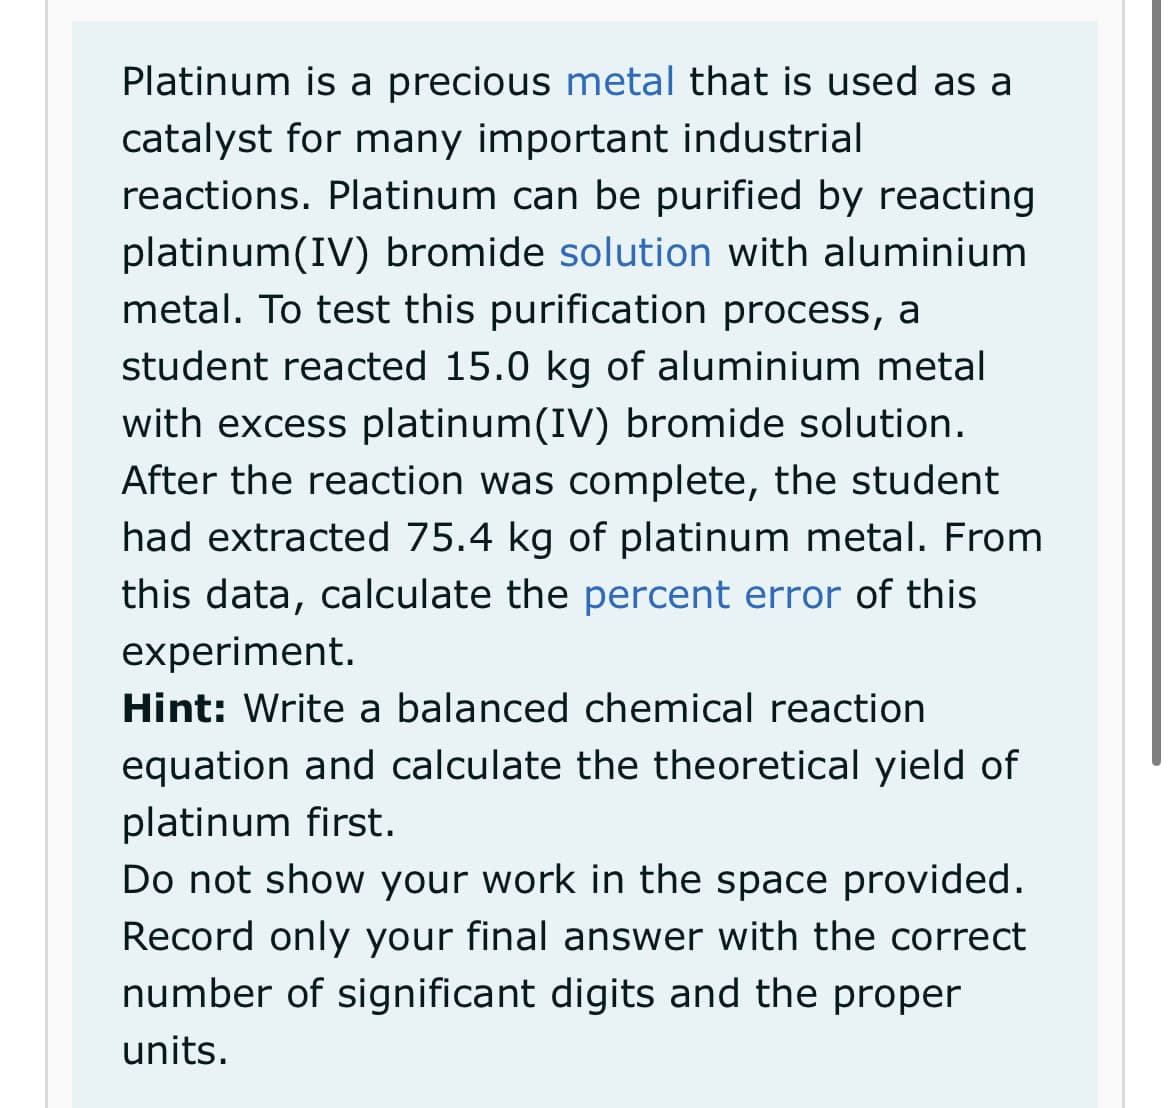 Platinum is a precious metal that is used as a
catalyst for many important industrial
reactions. Platinum can be purified by reacting
platinum(IV) bromide solution with aluminium
metal. To test this purification process, a
student reacted 15.0 kg of aluminium metal
with excess platinum(IV) bromide solution.
After the reaction was complete, the student
had extracted 75.4 kg of platinum metal. From
this data, calculate the percent error of this
experiment.
Hint: Write a balanced chemical reaction
equation and calculate the theoretical yield of
platinum first.
Do not show your work in the space provided.
Record only your final answer with the correct
number of significant digits and the proper
units.